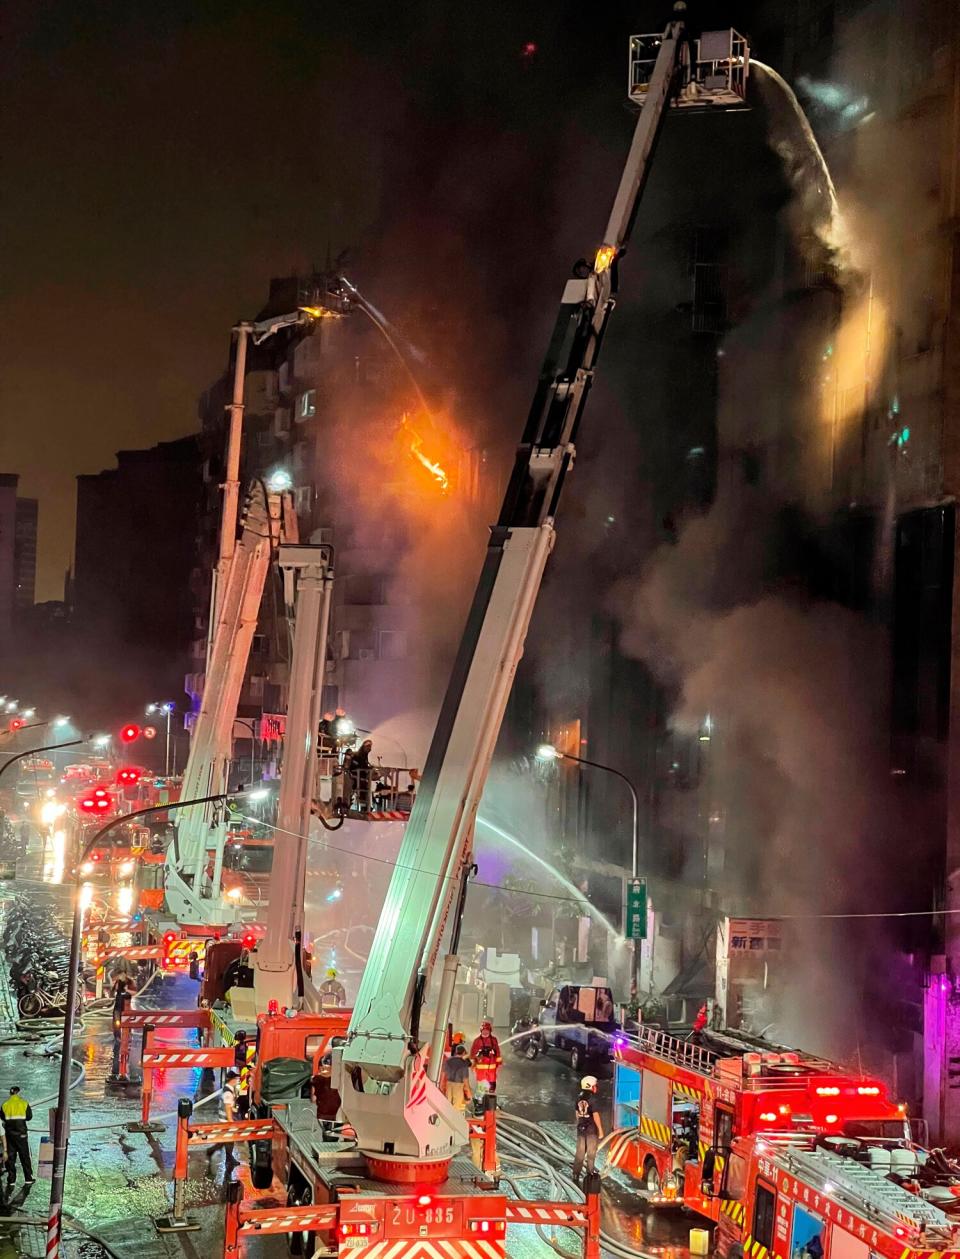 Firefighters battle a building fire in Kaohsiung